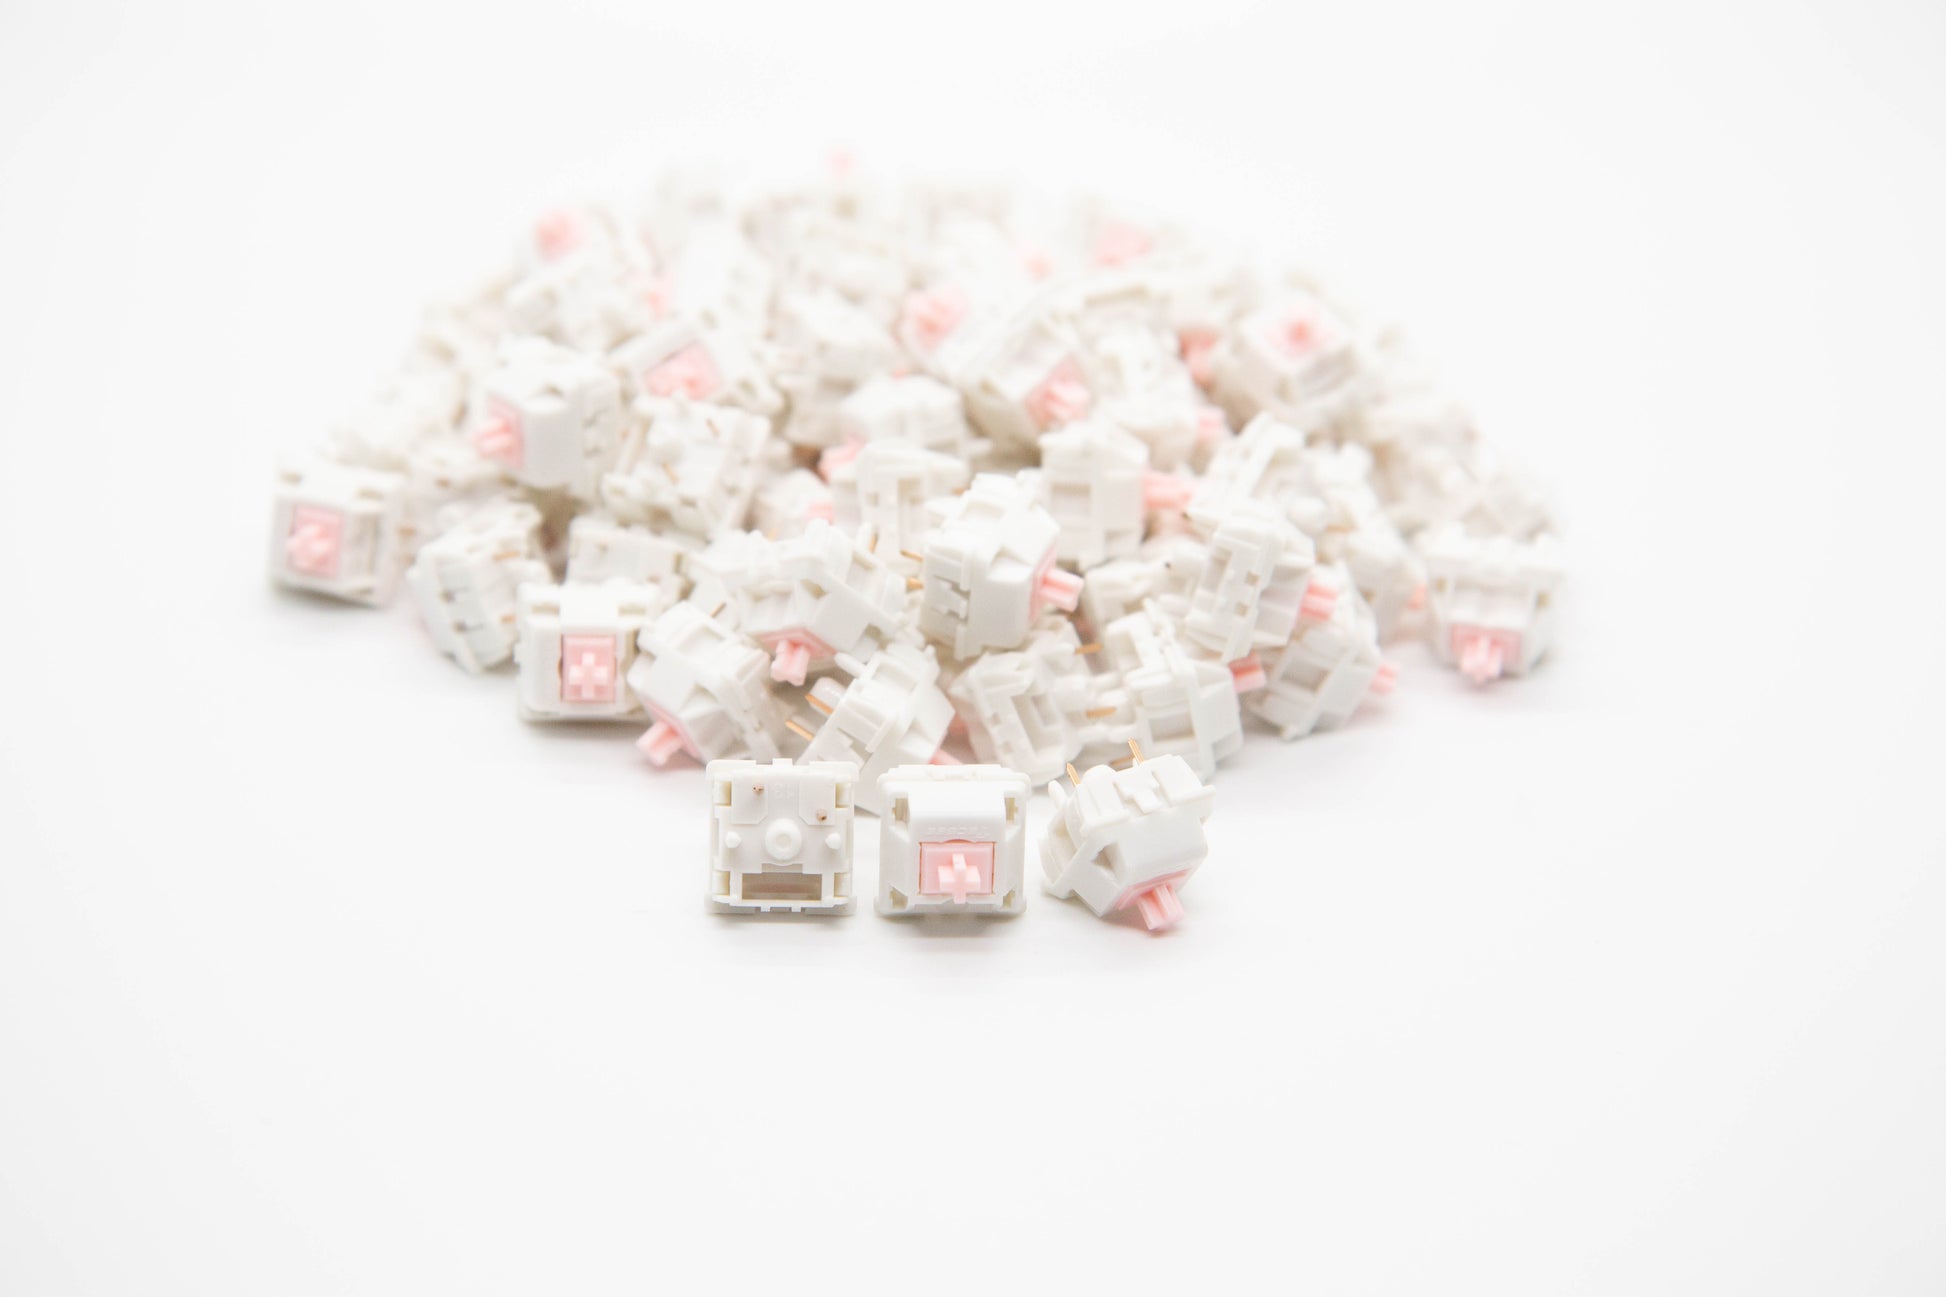 Close-up shot of a pile of Strawberry Milk - Linear themed mechanical keyboard switches featuring white housing and light pink stems